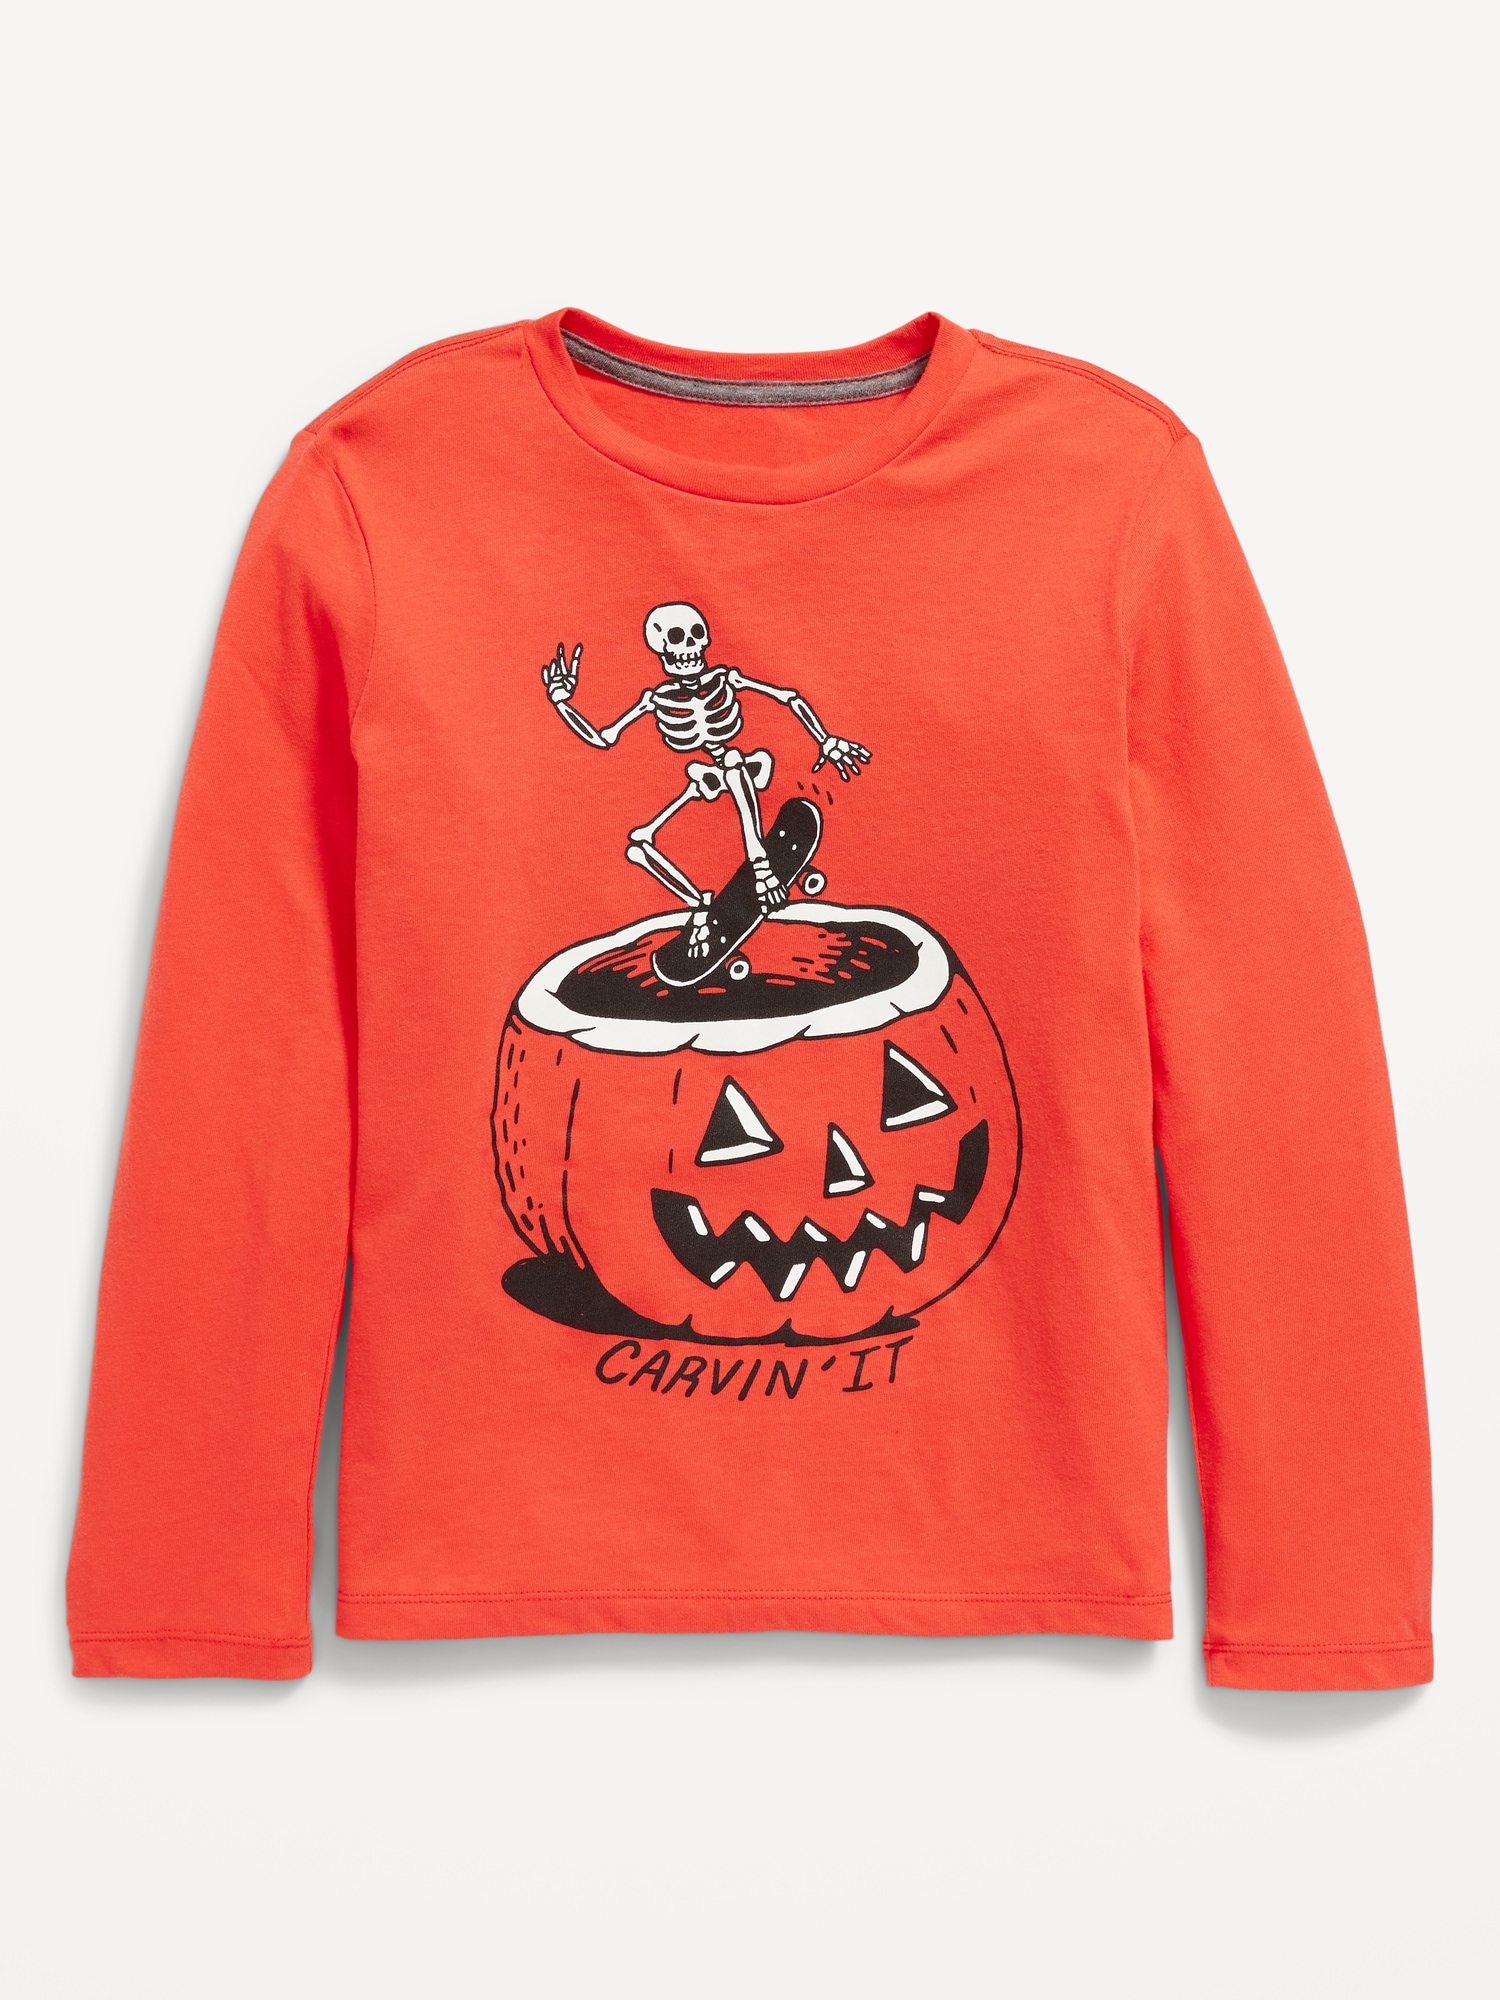 Long Sleeve Graphic T Shirt For Boys Old Navy